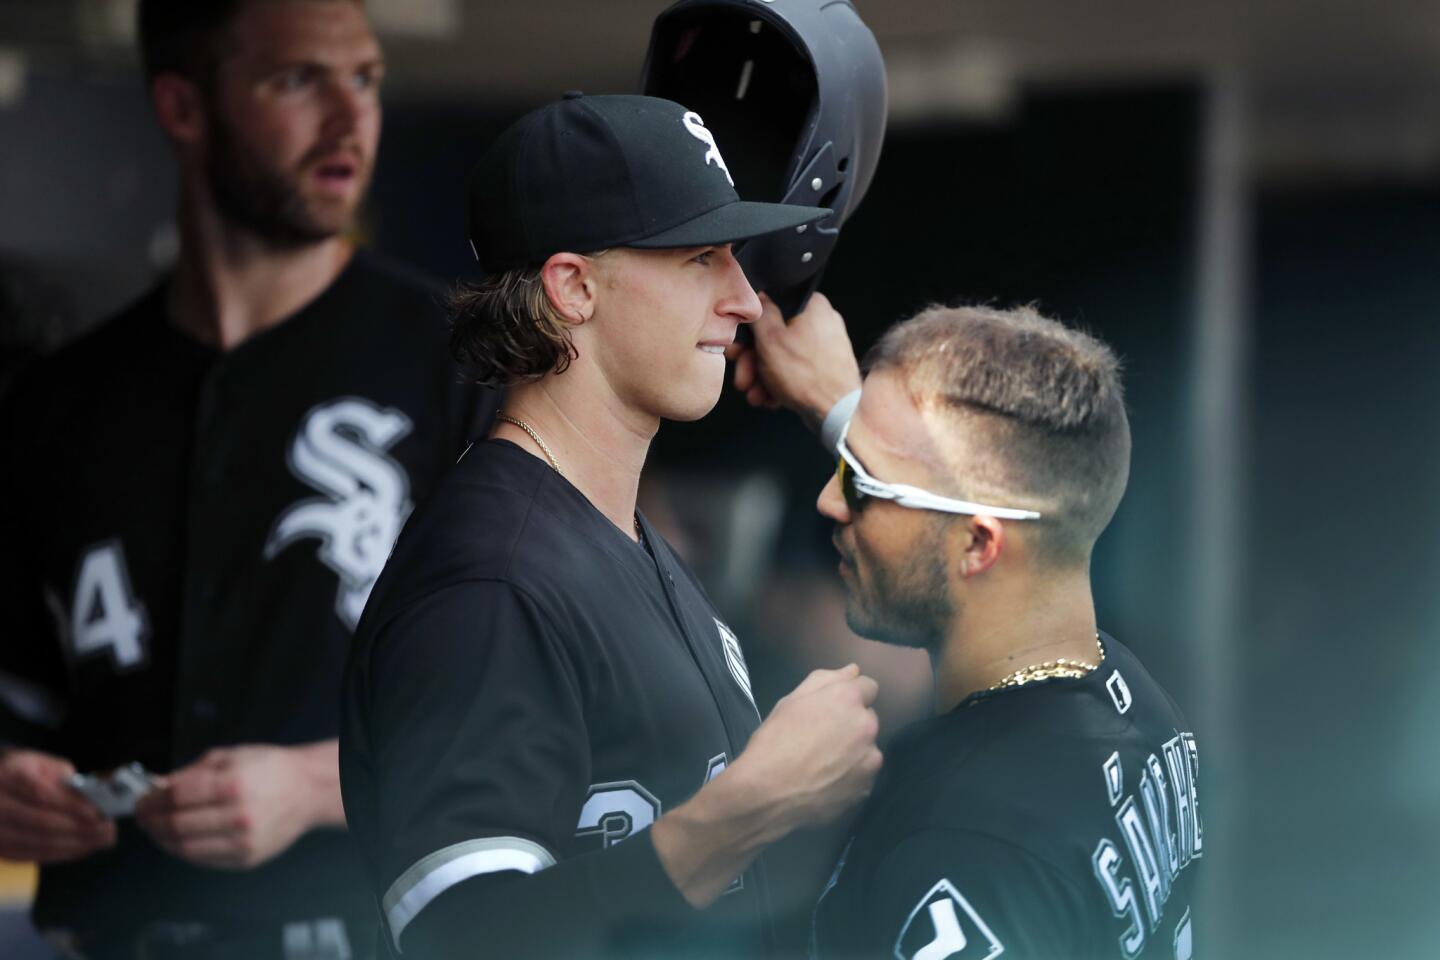 White Sox starter Michael Kopech, left, is embraced by teammate Yolmer Sanchez after being relieved during the seventh inning against the Tigers, Sunday, Aug. 26, 2018, in Detroit.